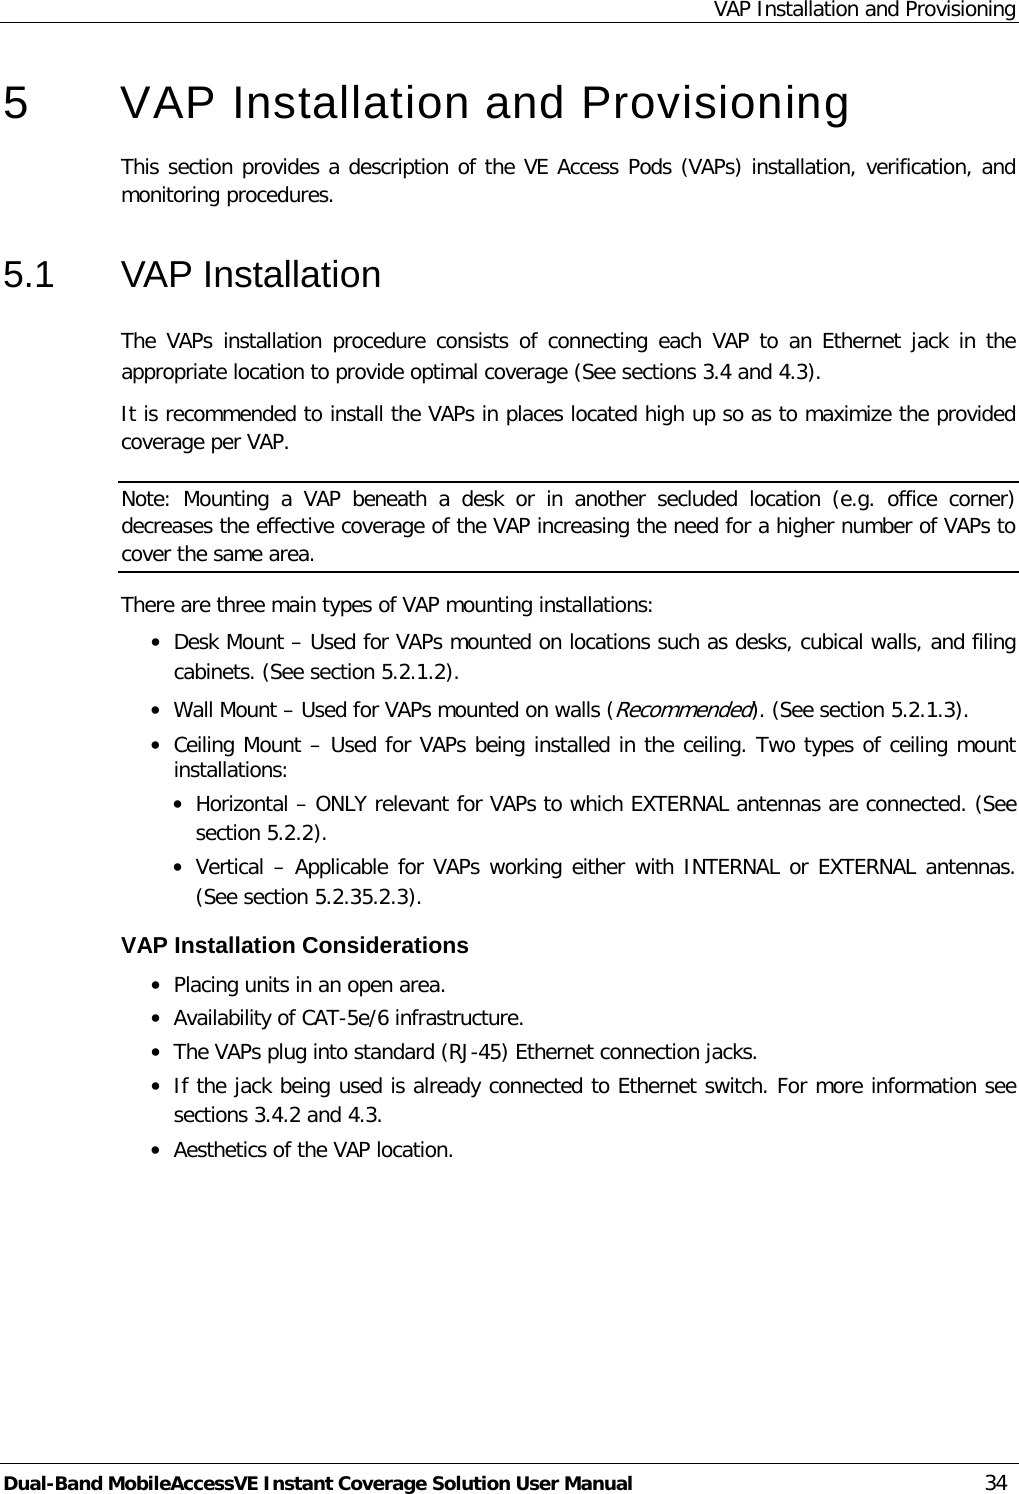 VAP Installation and Provisioning Dual-Band MobileAccessVE Instant Coverage Solution User Manual 34 5  VAP Installation and Provisioning This section provides a description of the VE Access Pods (VAPs) installation, verification, and monitoring procedures. 5.1  VAP Installation The  VAPs  installation procedure consists of connecting each VAP  to  an Ethernet jack in the appropriate location to provide optimal coverage (See sections  3.4 and  4.3). It is recommended to install the VAPs in places located high up so as to maximize the provided coverage per VAP.  Note: Mounting a VAP beneath a desk or in another secluded location (e.g. office corner) decreases the effective coverage of the VAP increasing the need for a higher number of VAPs to cover the same area. There are three main types of VAP mounting installations: · Desk Mount – Used for VAPs mounted on locations such as desks, cubical walls, and filing cabinets. (See section  5.2.1.2). · Wall Mount – Used for VAPs mounted on walls (Recommended). (See section  5.2.1.3). · Ceiling Mount – Used for VAPs being installed in the ceiling. Two types of ceiling mount installations: · Horizontal – ONLY relevant for VAPs to which EXTERNAL antennas are connected. (See section  5.2.2). · Vertical – Applicable for VAPs working either with INTERNAL or EXTERNAL antennas. (See section  5.2.3 5.2.3). VAP Installation Considerations · Placing units in an open area. · Availability of CAT-5e/6 infrastructure. · The VAPs plug into standard (RJ-45) Ethernet connection jacks. · If the jack being used is already connected to Ethernet switch. For more information see sections  3.4.2 and  4.3. · Aesthetics of the VAP location. 